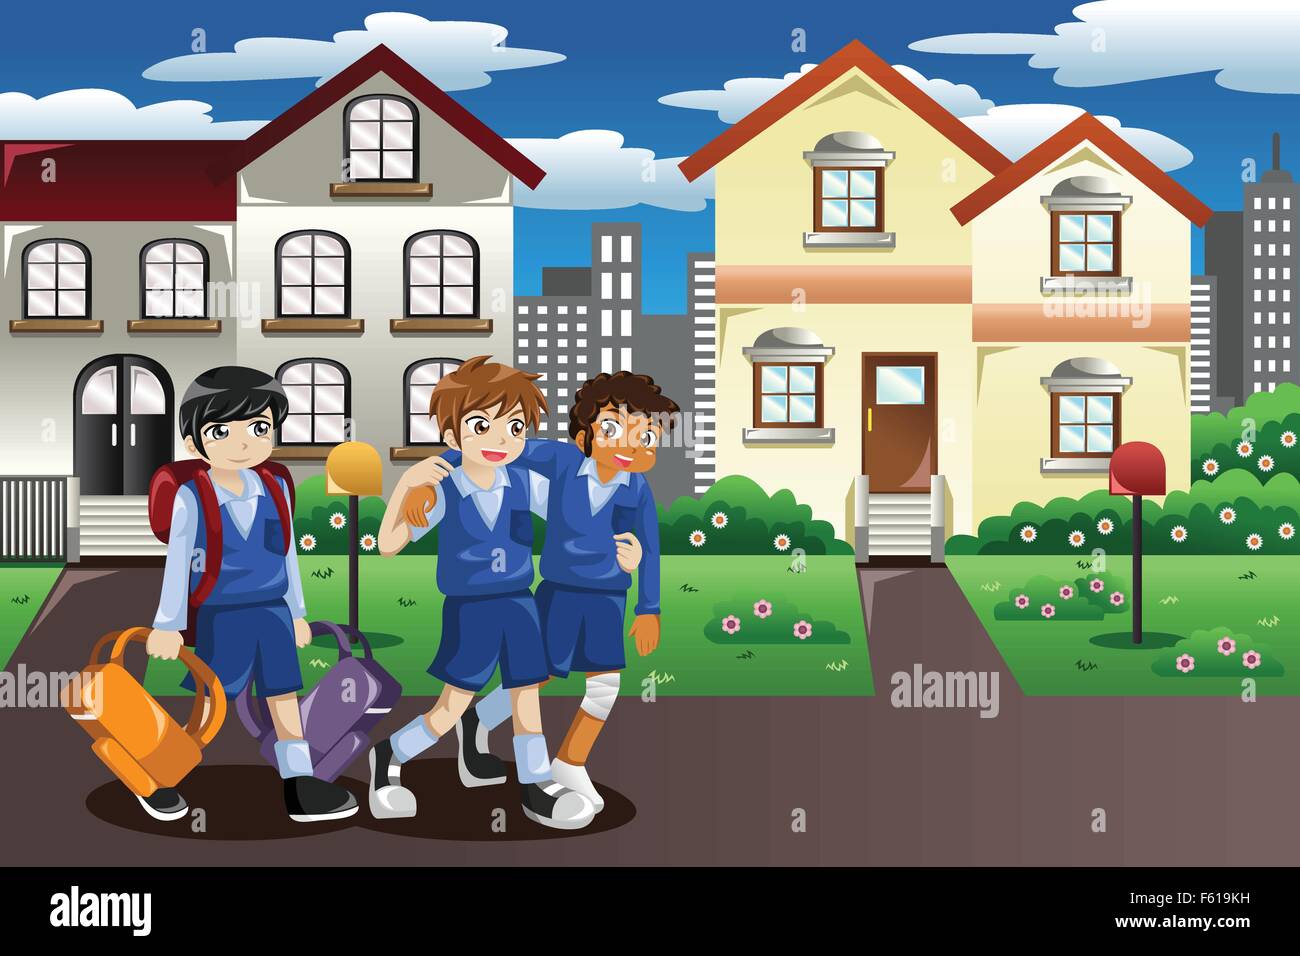 A vector illustration of injured kid walking home from school and his friends help him carrying his books and bag Stock Vector